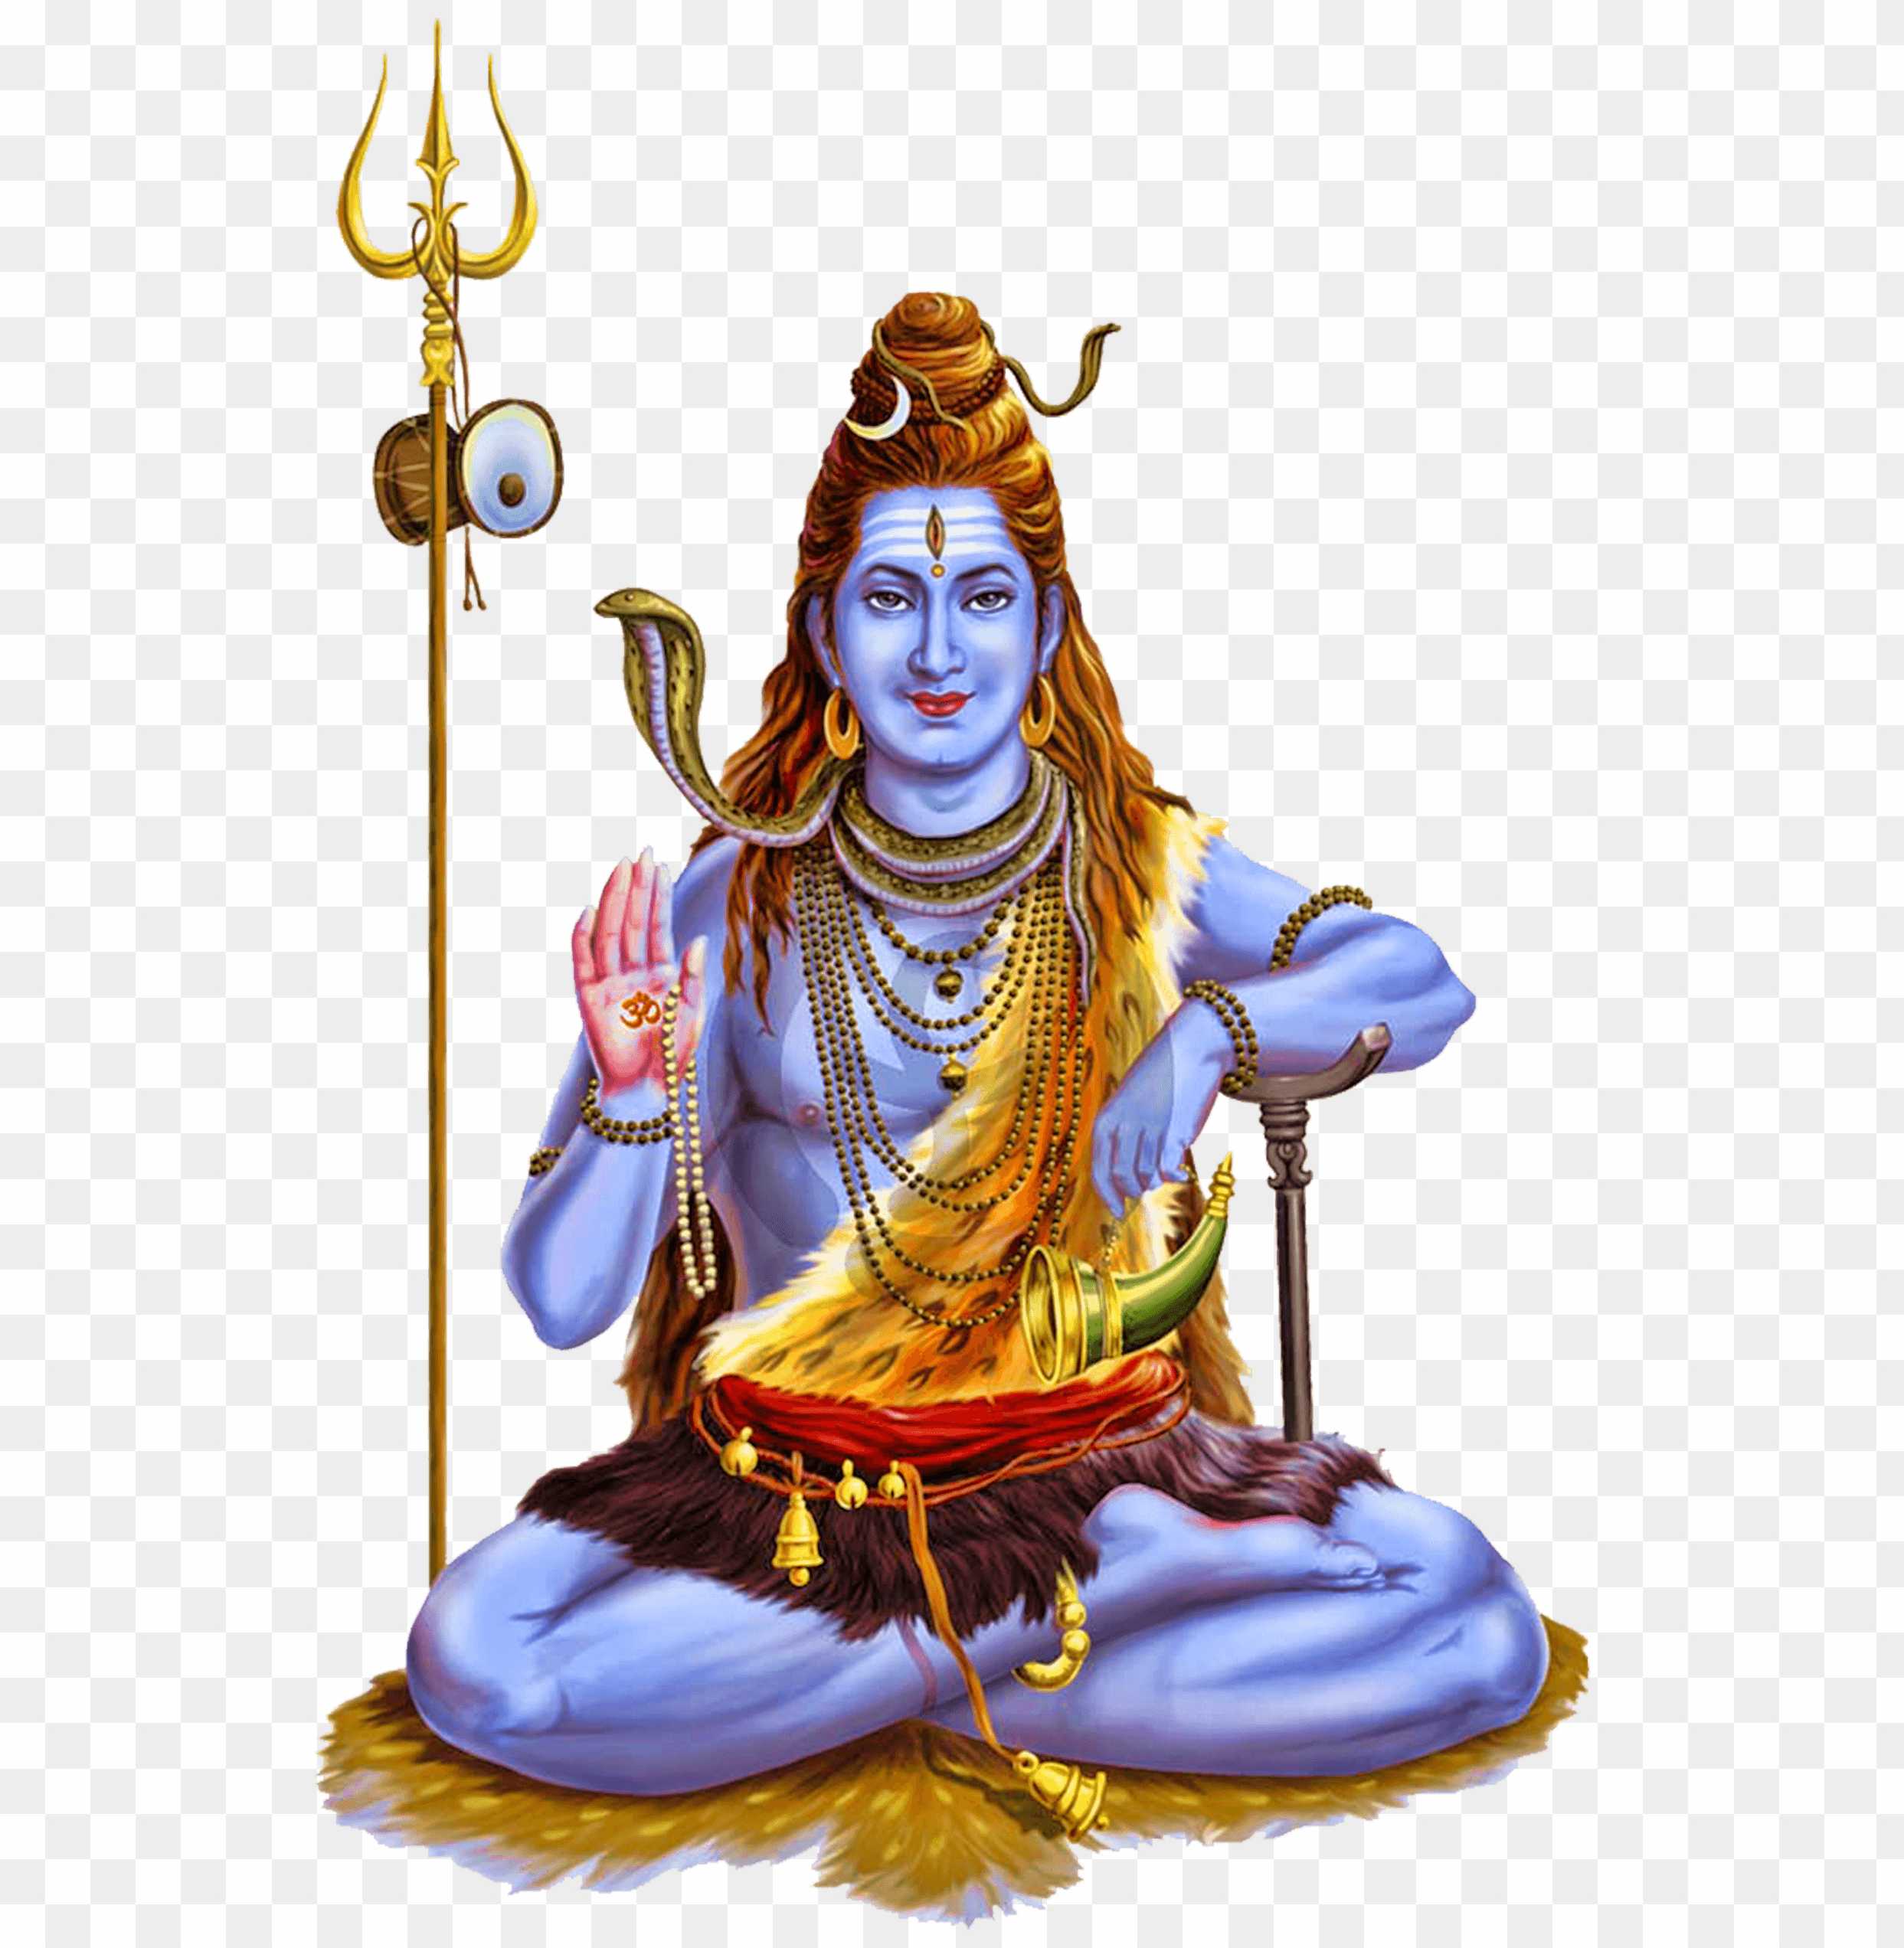 Lord Shiva PNG images download - transparent background PNG cliparts free  download | AllPNGFree